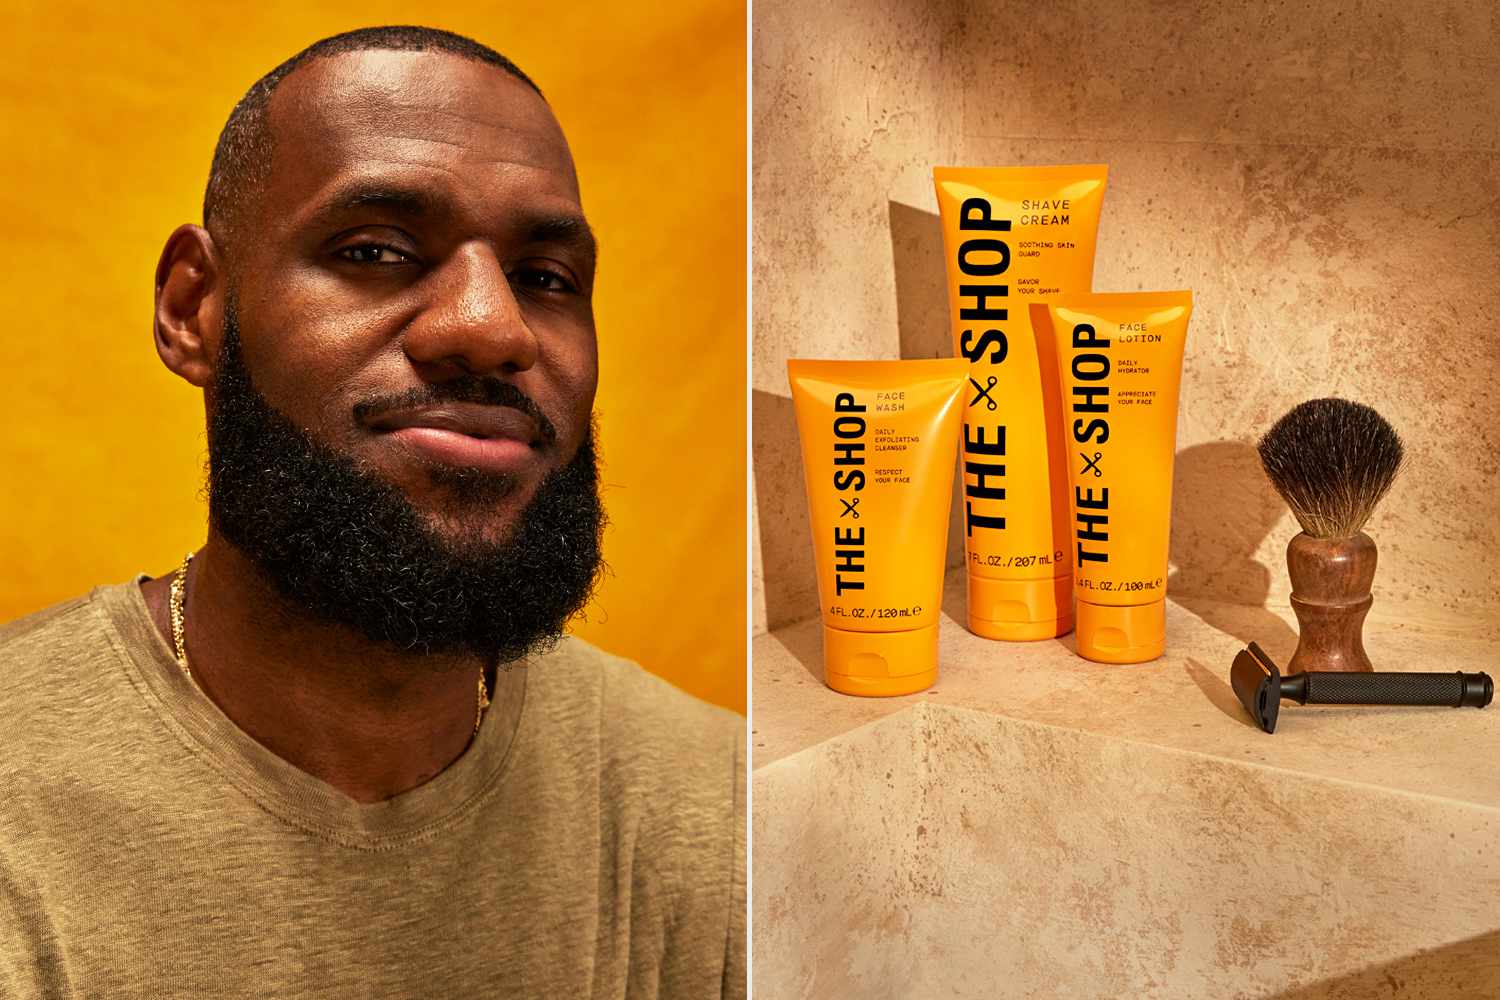 LeBron James Drops Grooming Line The Shop (Exclusive) [Video]